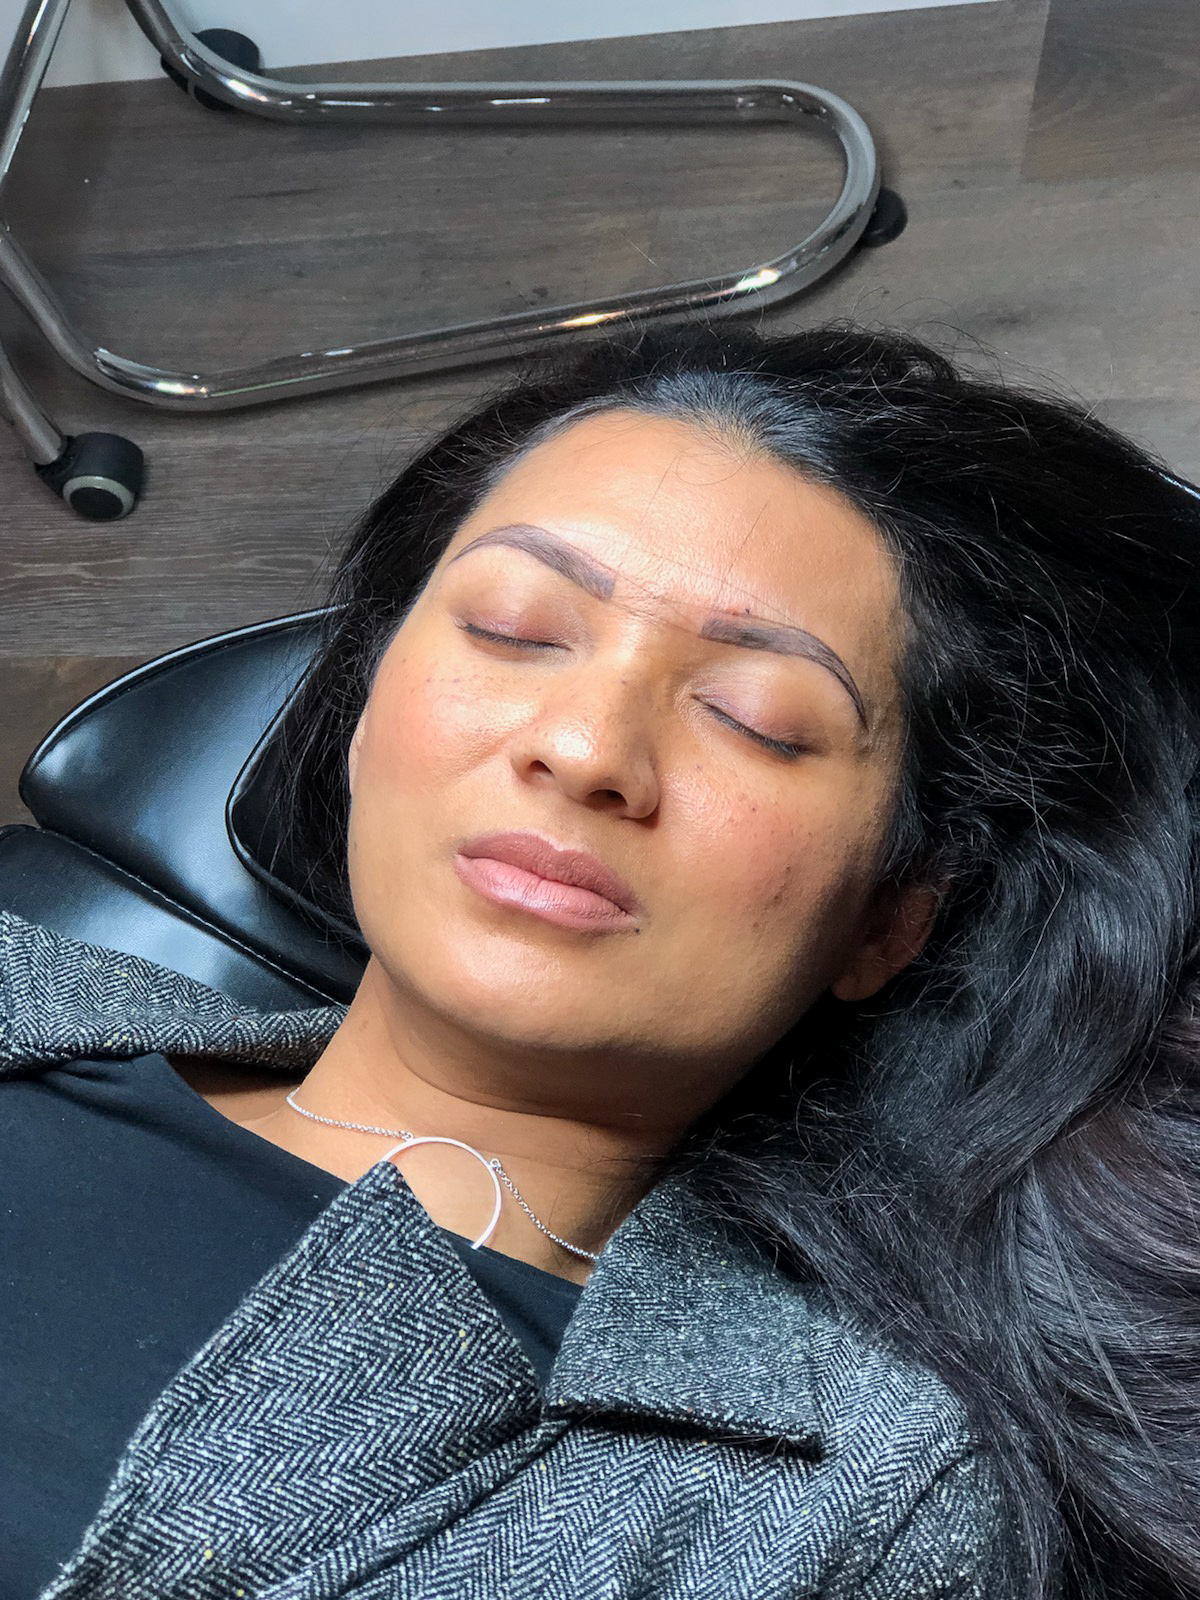 Curious about microbladding? Orange County Style Blogger Debbie Savage is sharing how she is upping her brow game with microbladding.  Click to see her experience here!